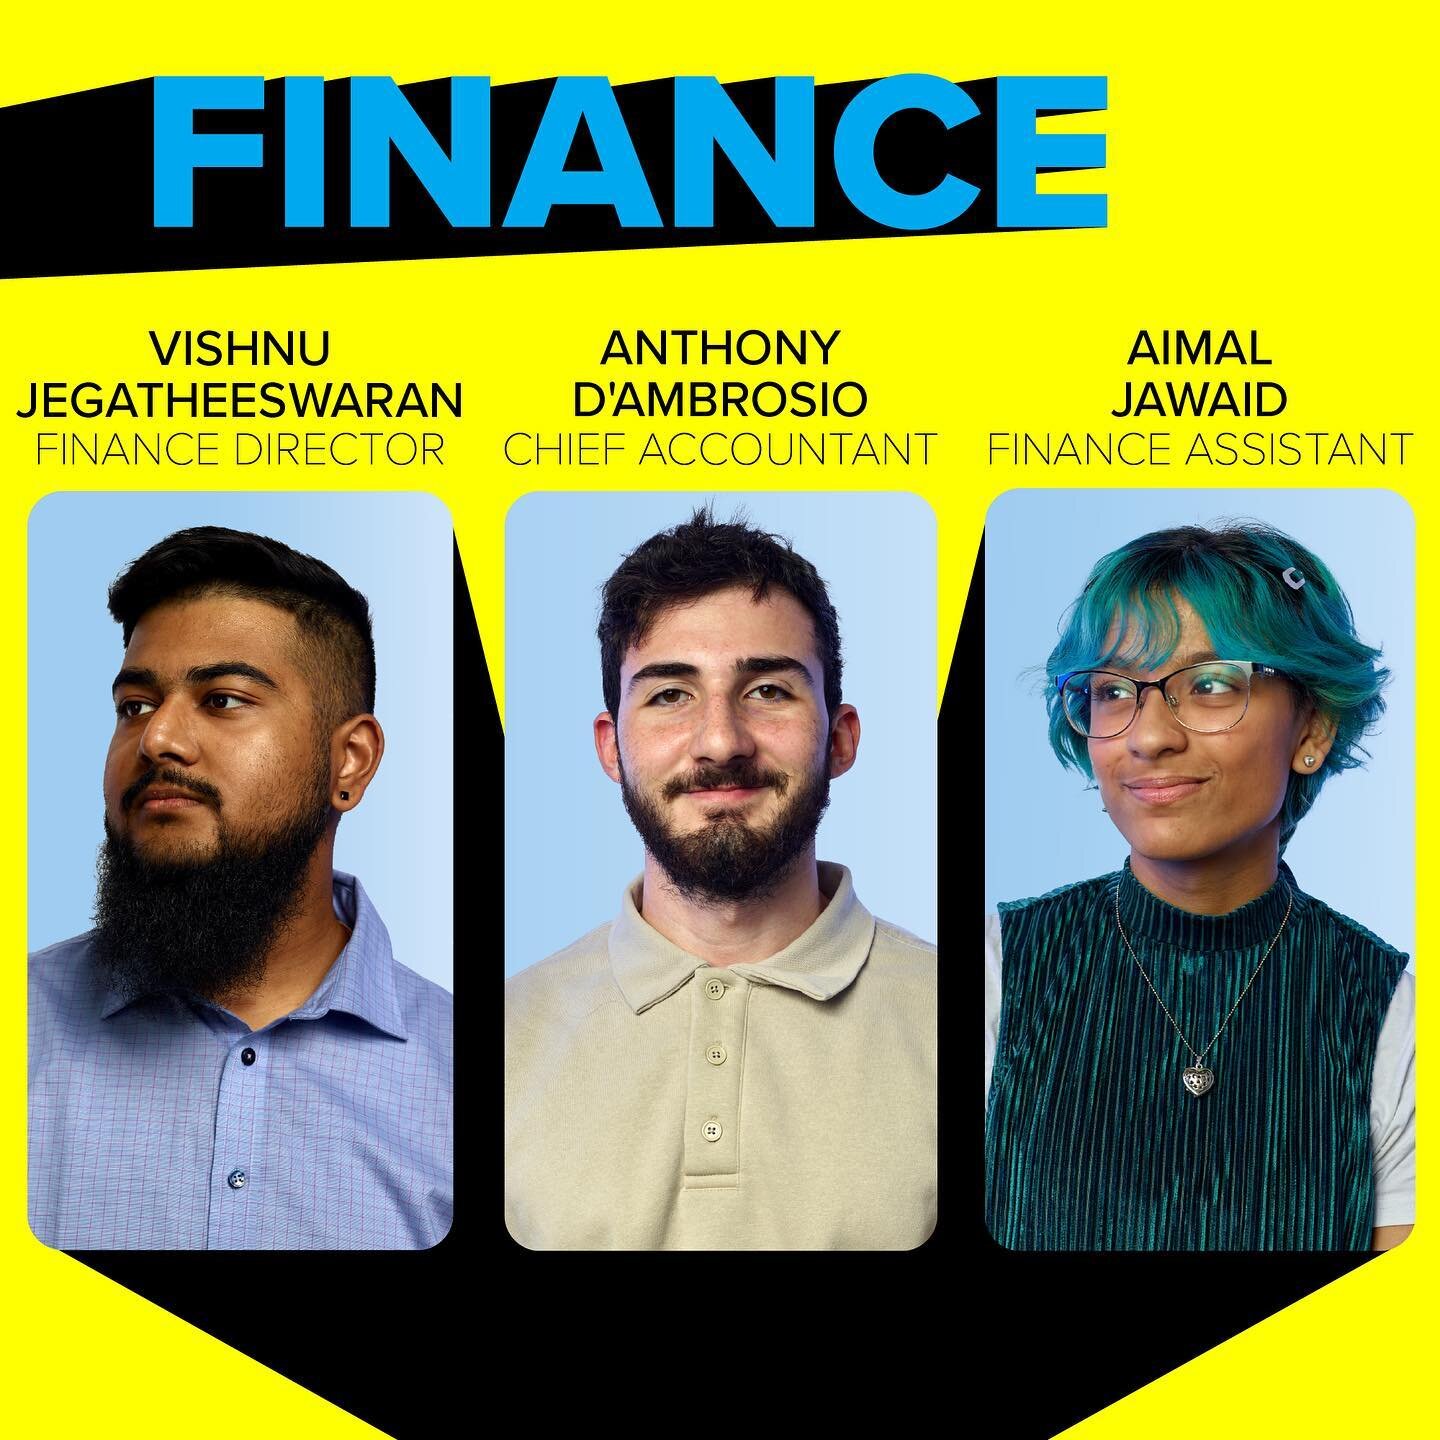 Team Intros Day 2: FINANCE 🤑

This team is all about the money! 
Finance Director, Vishnu, oversees budgeting plans, negotiations, partner and sponsorship outreach, transactions, and big decisions leading all departments to spend their cuts as effic